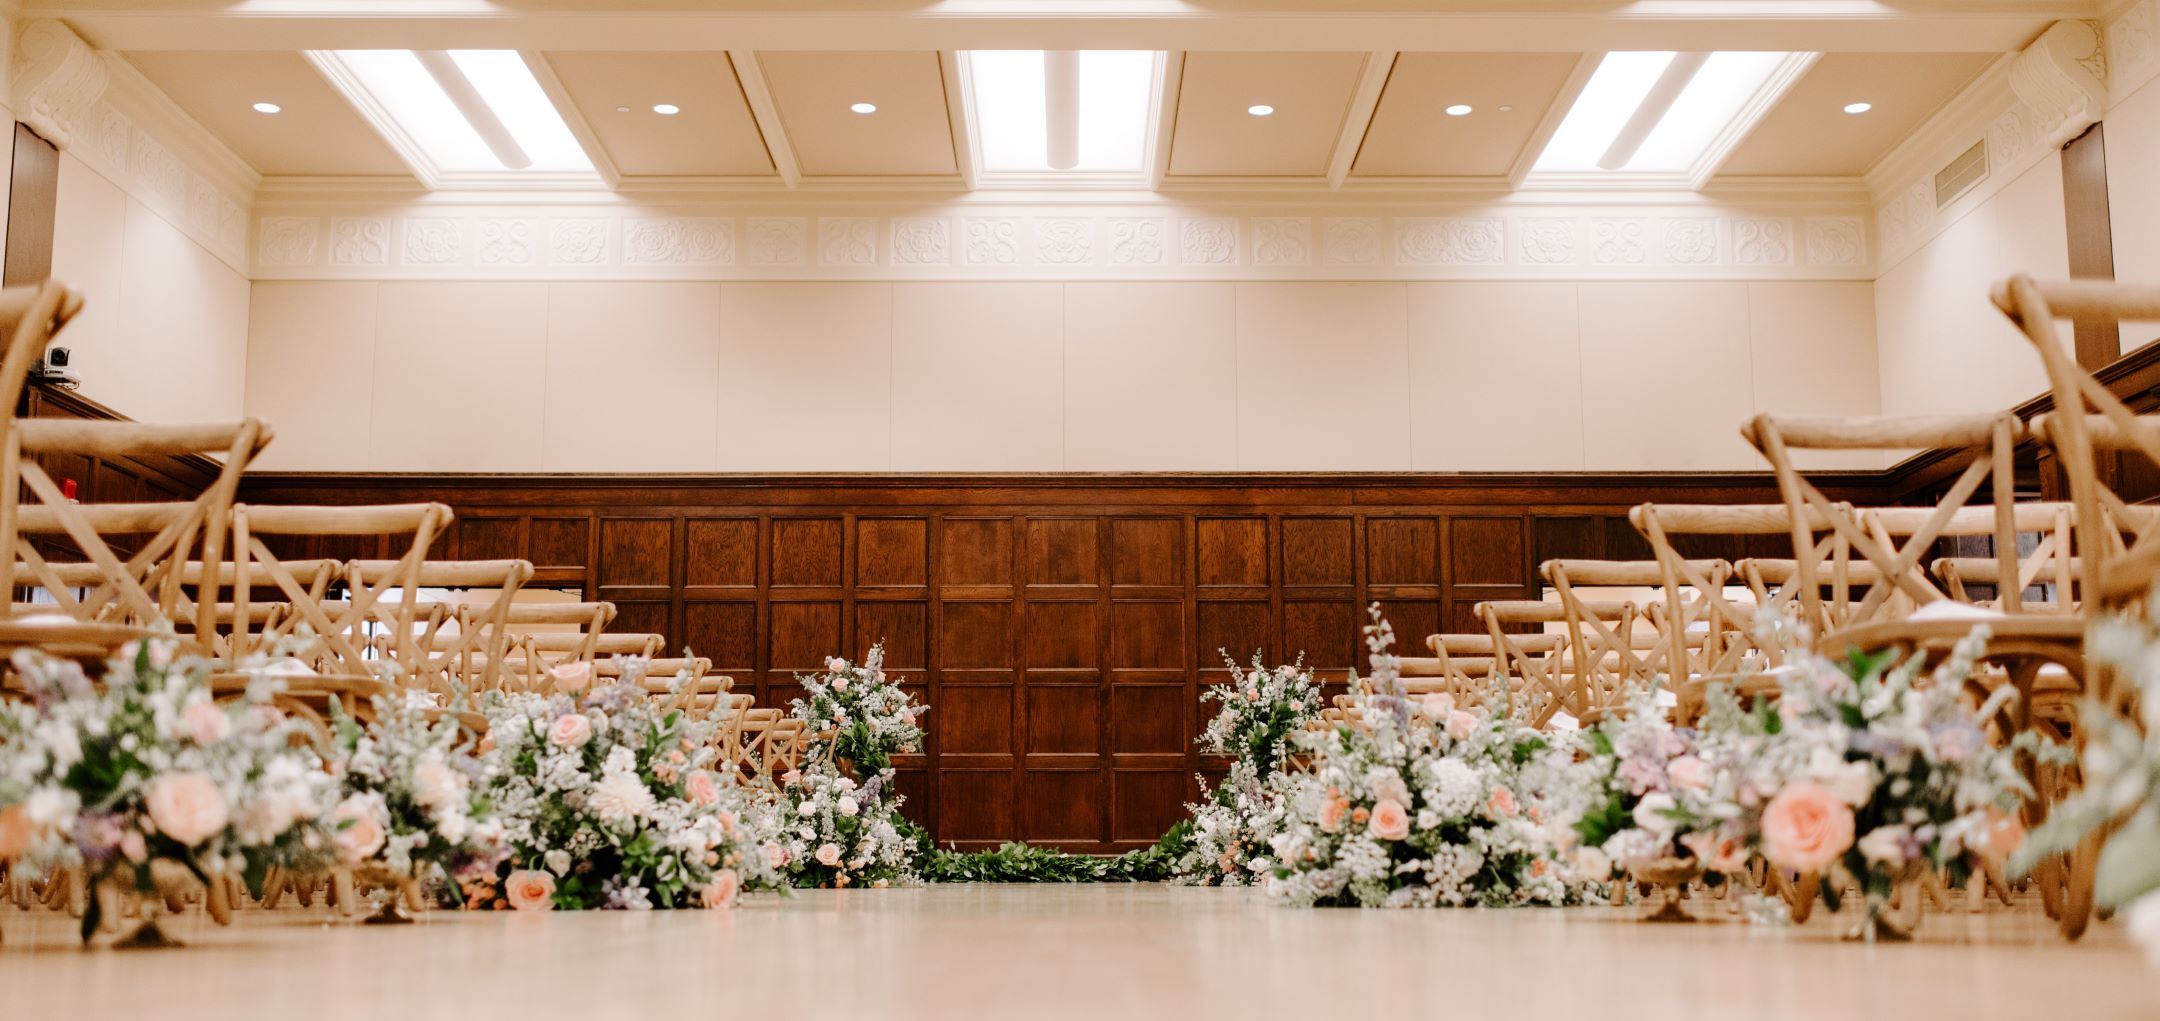 A photo of the South Ballroom decorated for a wedding.